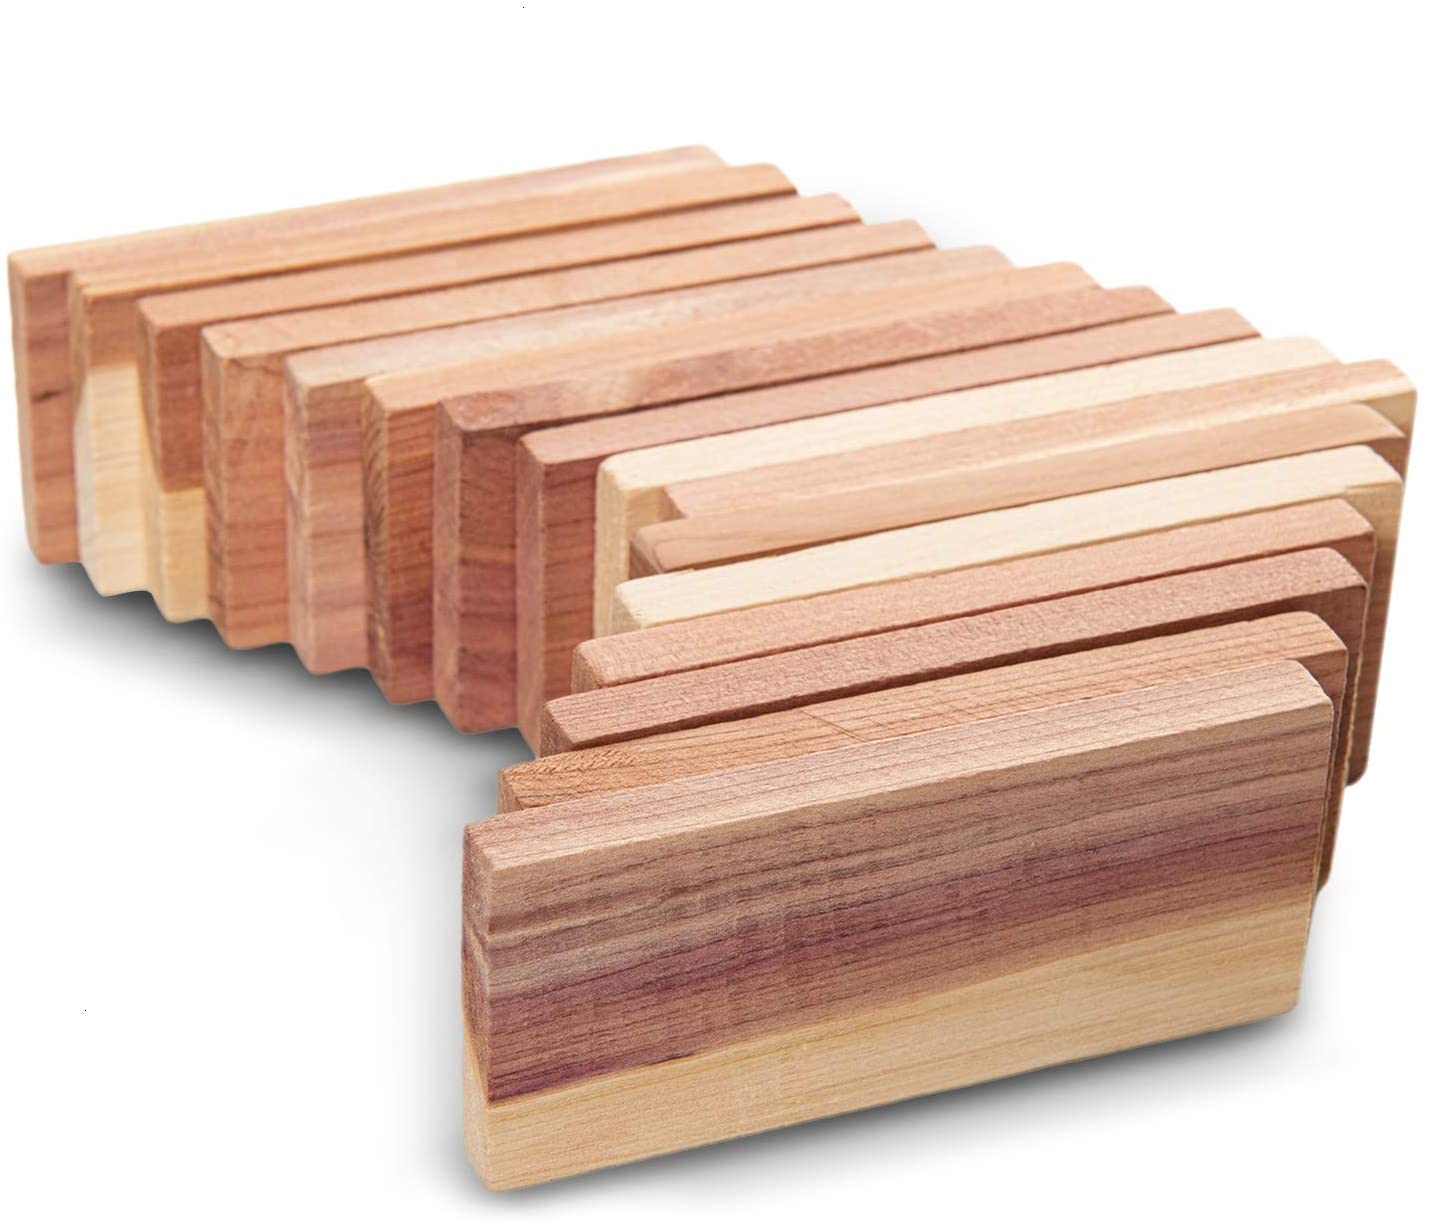 10 Aromatic Cedar Blocks and Balls for Storage Spaces Storables